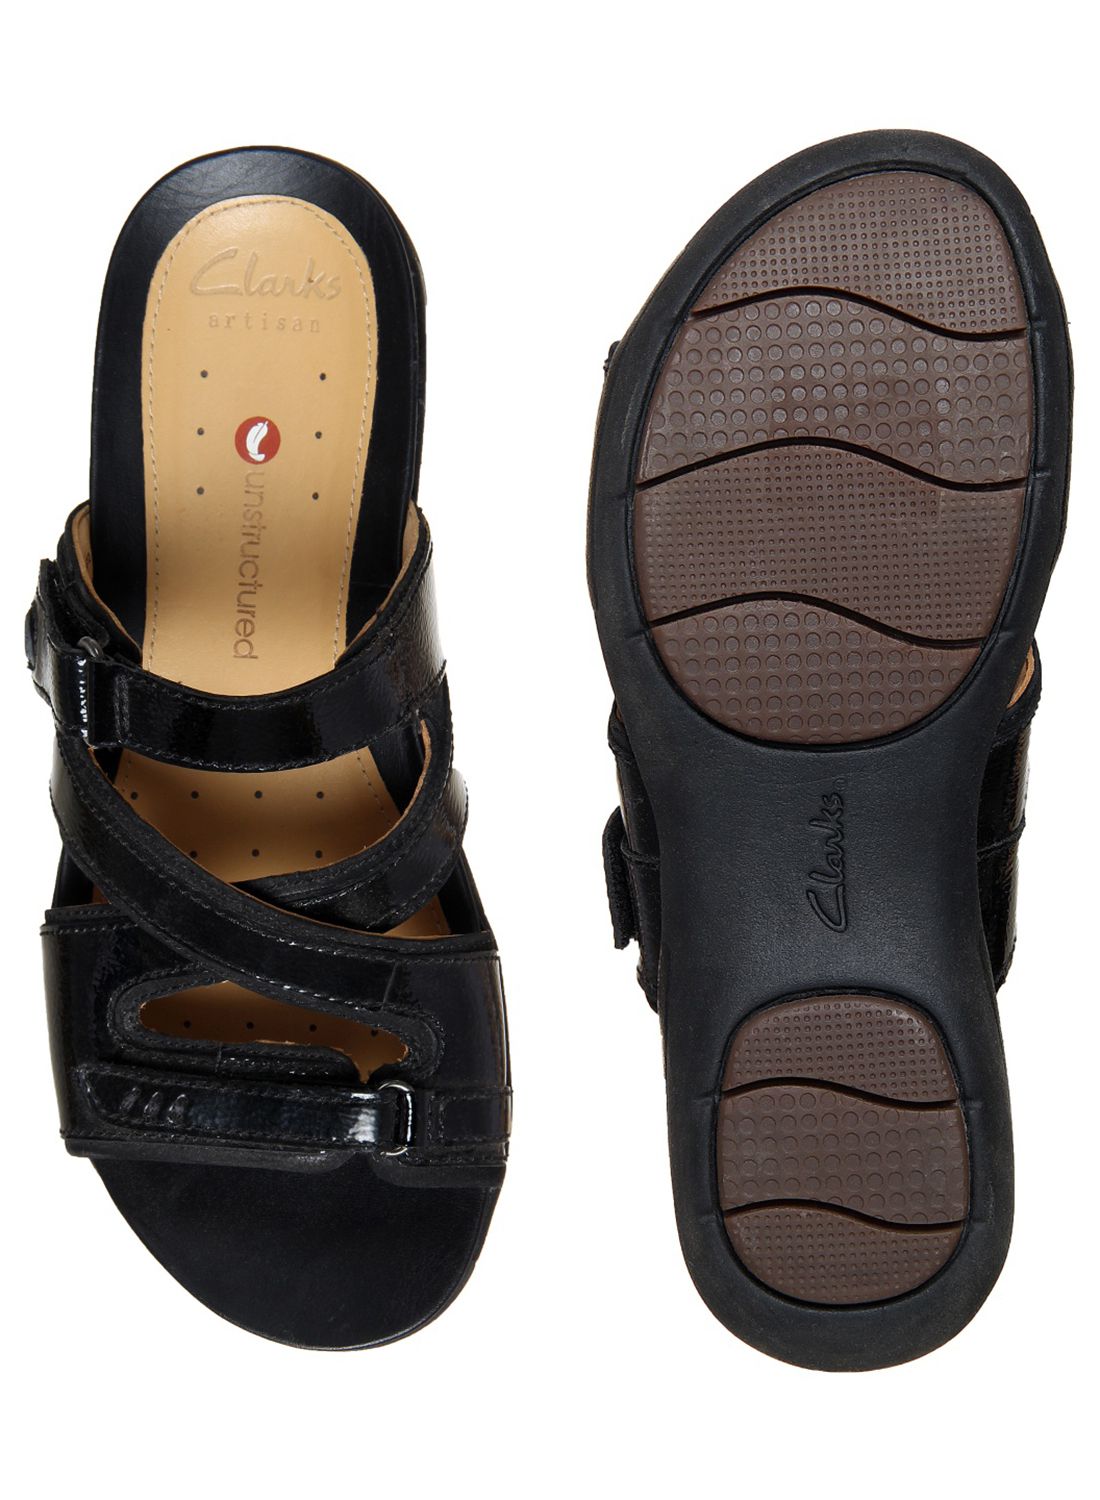 Clarks Black Flats Price in India- Buy Clarks Black Flats Online at ...